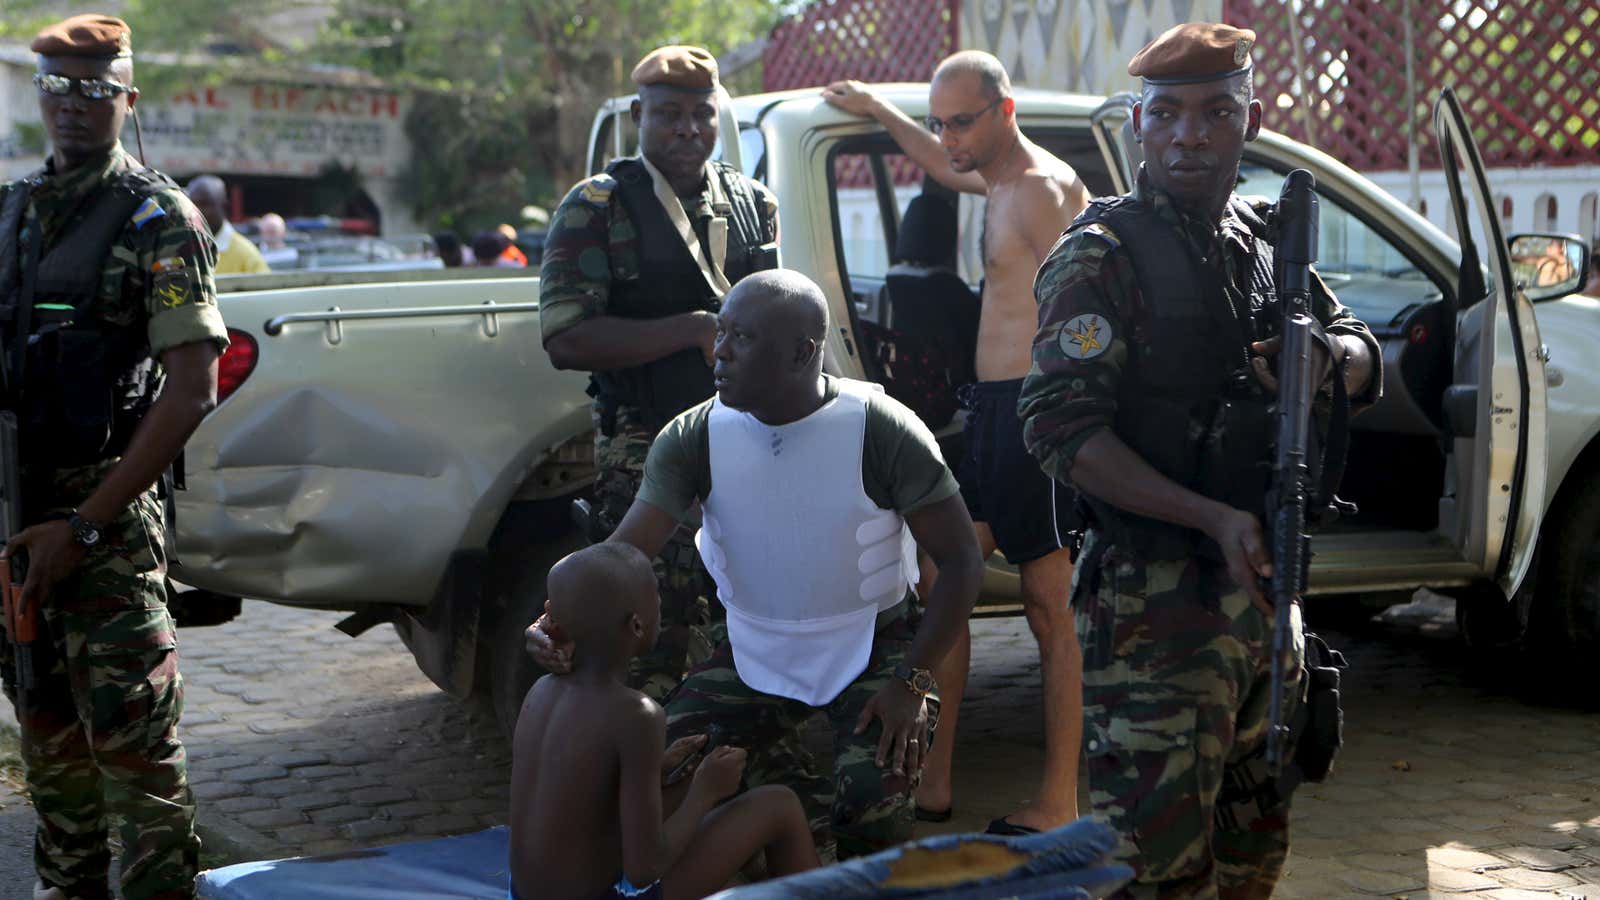 A soldier comforts an injured boy in Bassam, Ivory Coast, following an attack that left 18 people dead.